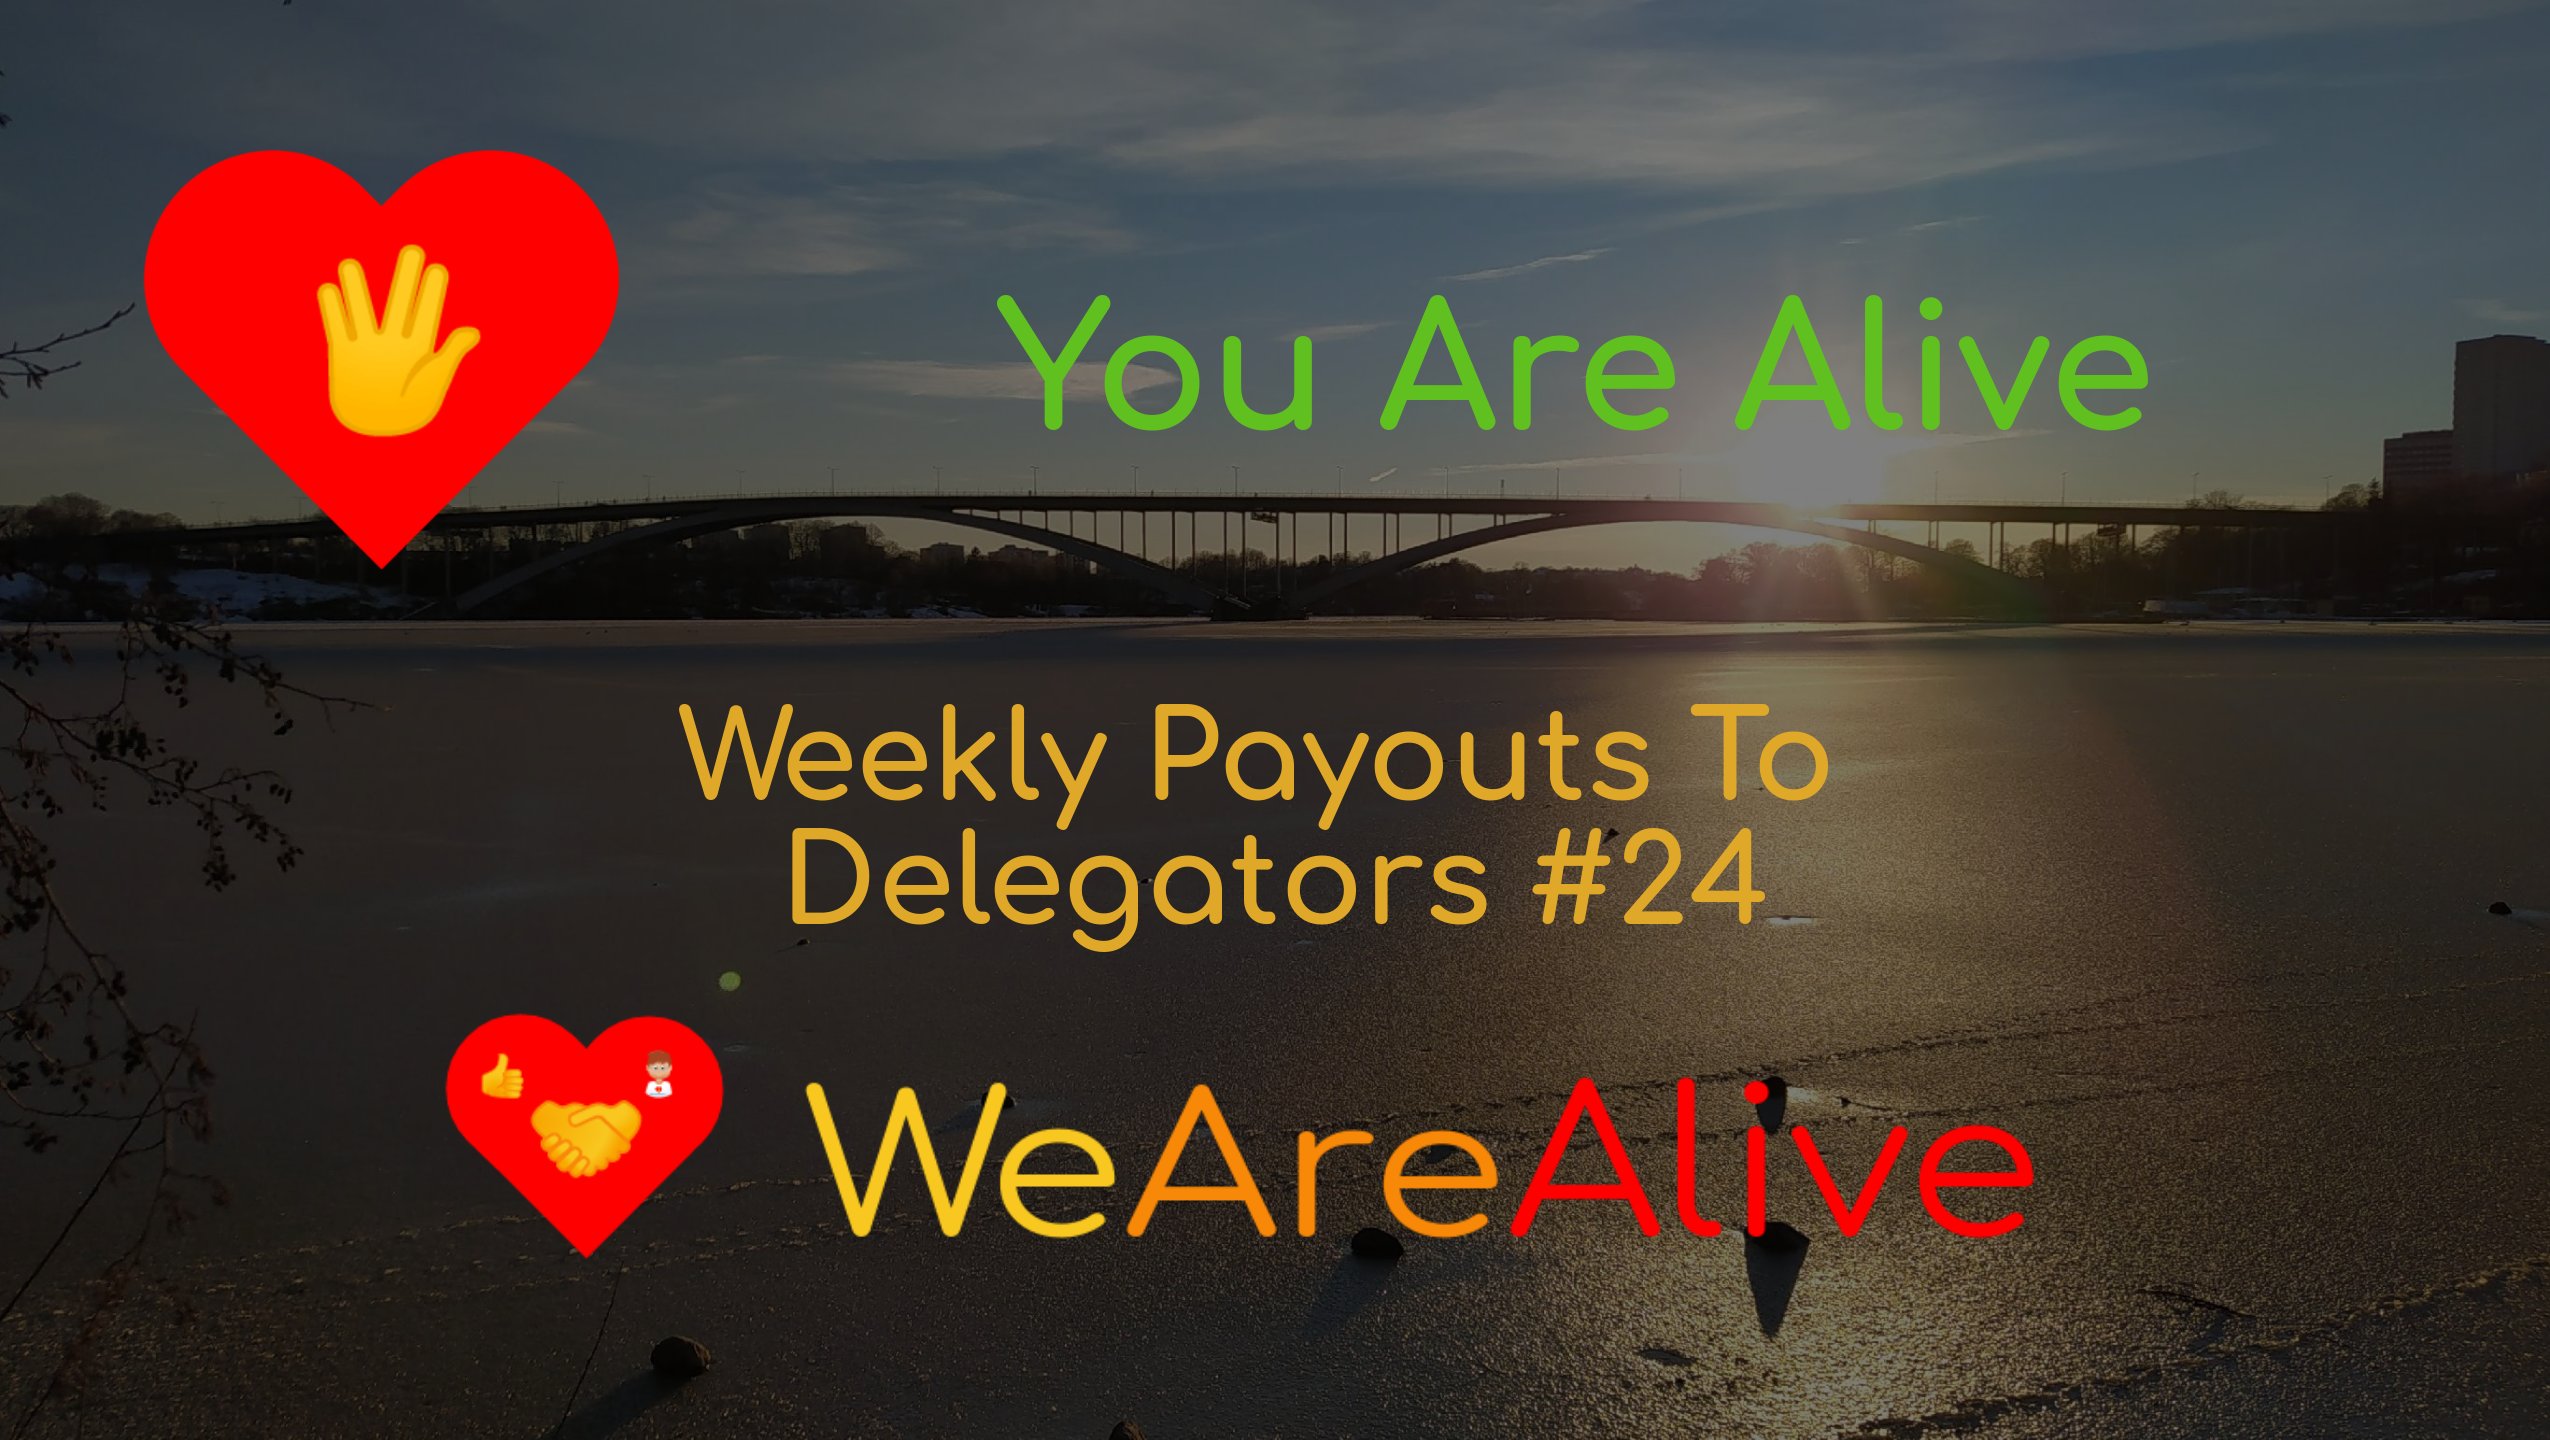 @youarealive/you-are-alive-weekly-payouts-to-hp-delegators-24